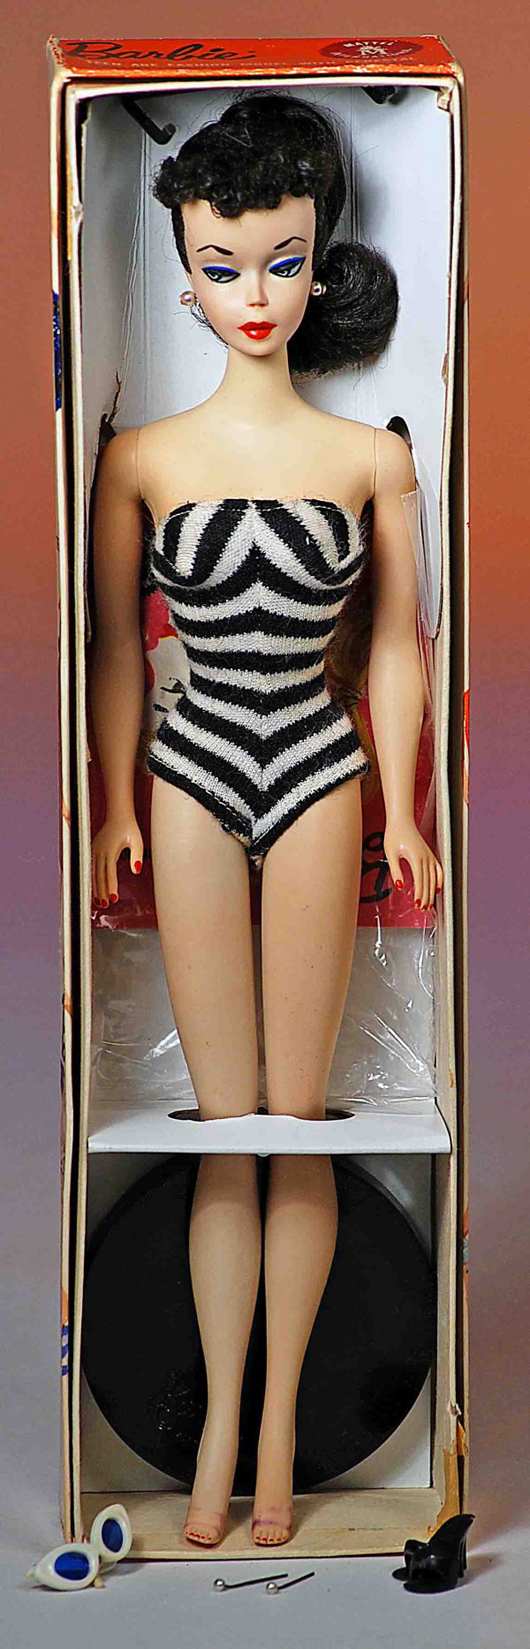 All original Mattel Barbie no. 2, 11 1/2 inches tall, complete 1959 doll, excellent condition in original box. Estimate: $4,000-$5,000. Image courtesy of Frasher’s Doll Auction.